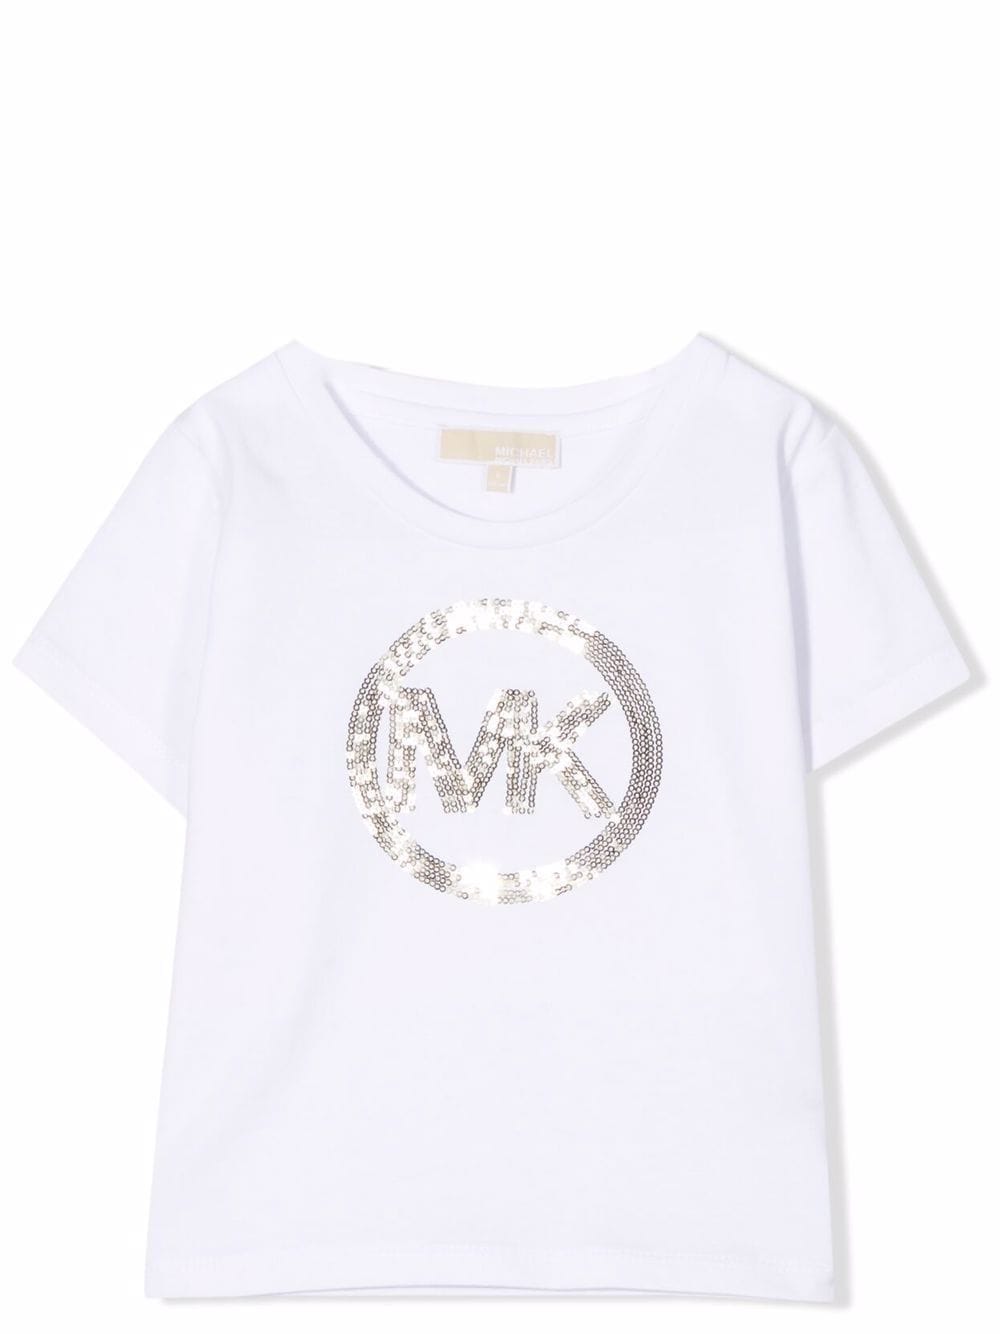 MICHAEL KORS T-SHIRT WITH SEQUINS